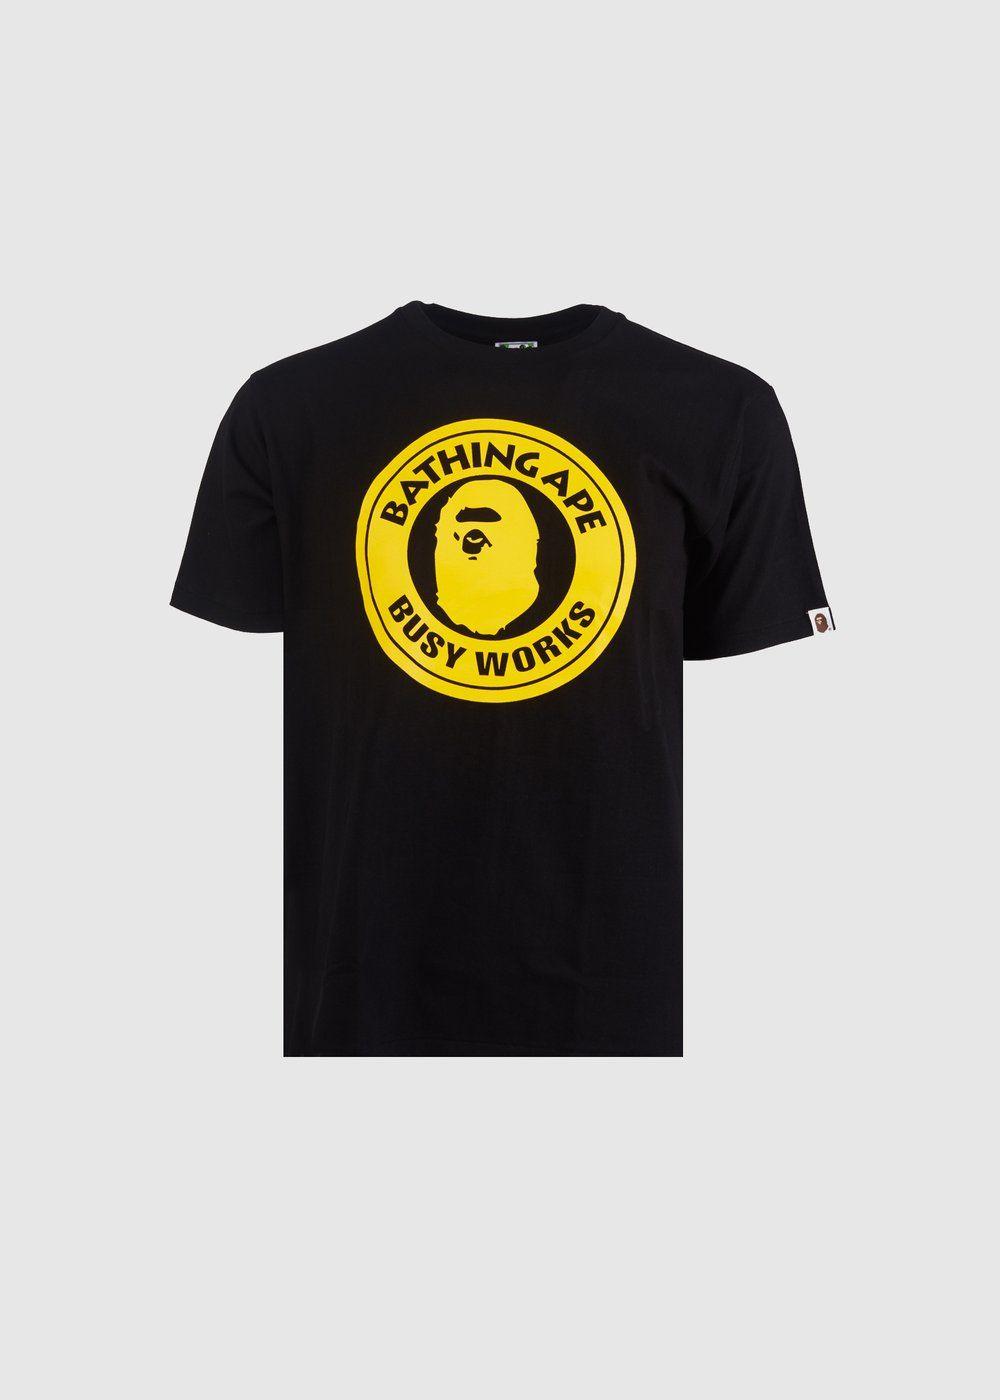 Work in Black and Yellow Logo - Bape: Bicolor Busy Works Tee [Black] – Social Status